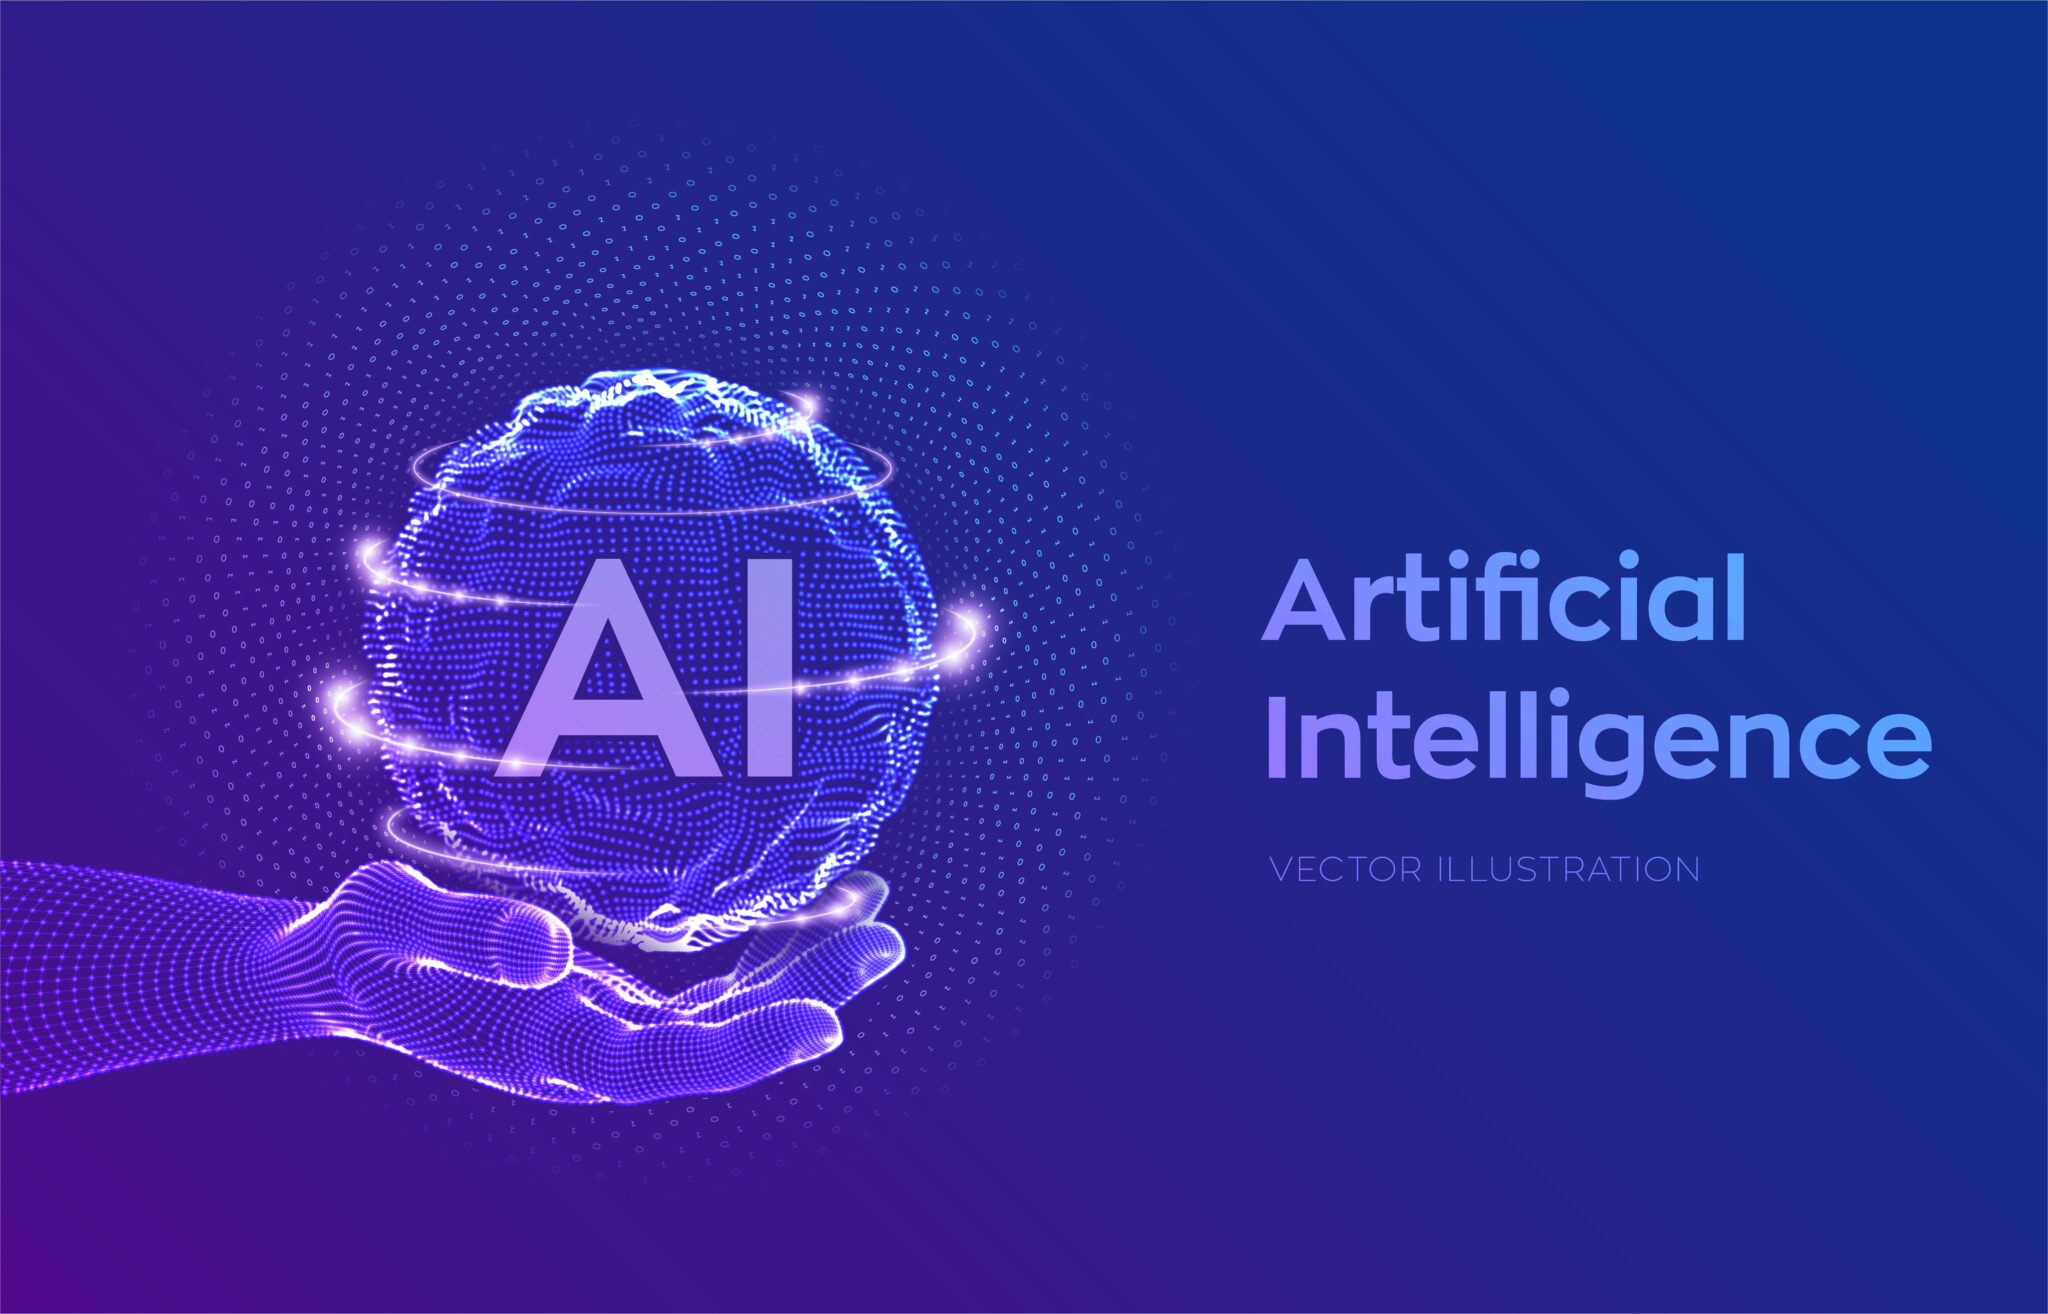 AI. Artificial Intelligence Logo in hand. Artificial Intelligence and Machine Learning Concept. Sphere grid wave with binary code. Big data innovation technology. Neural networks. Vector illustration